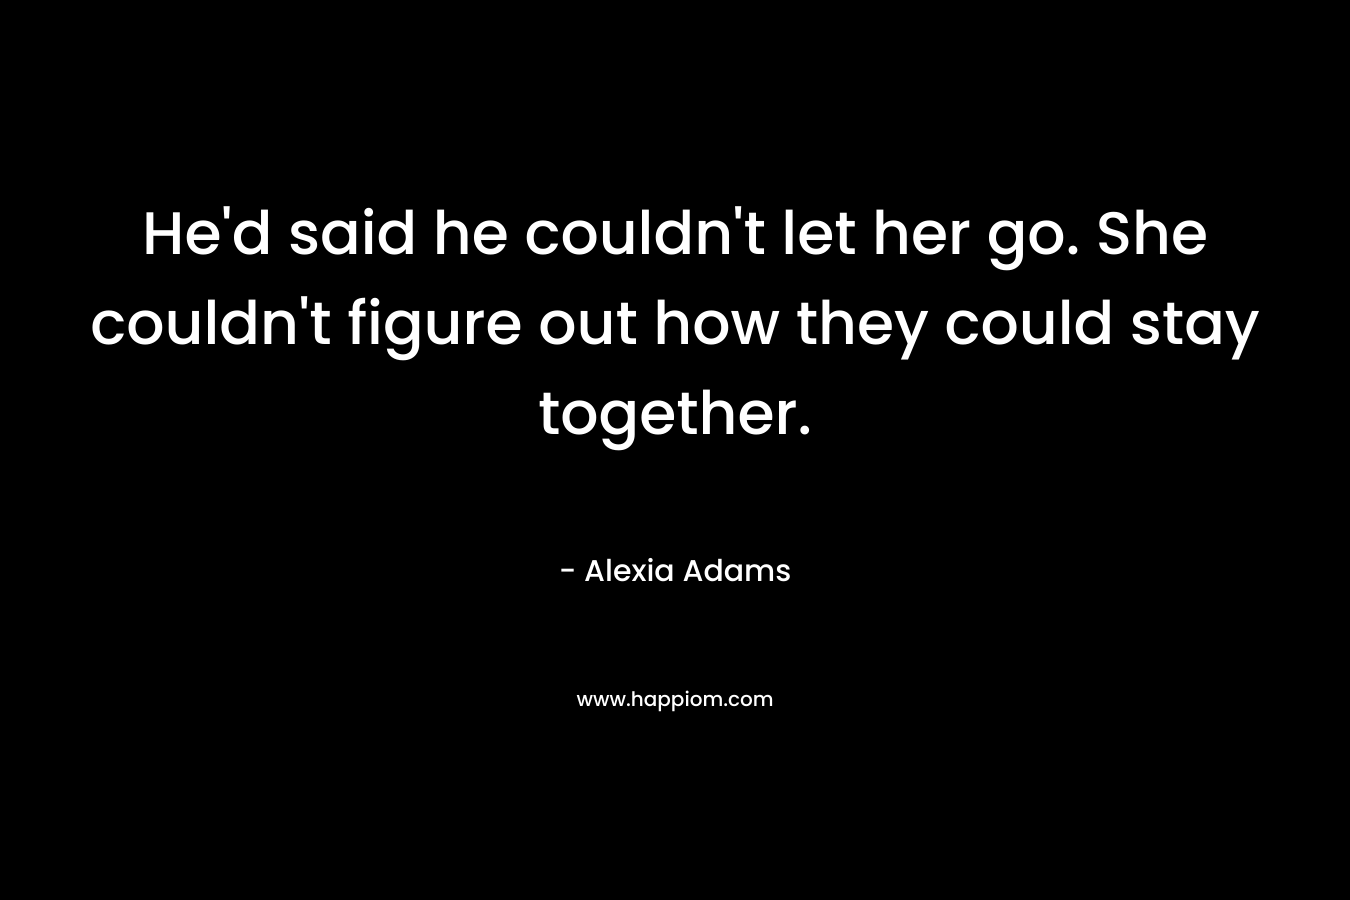 He’d said he couldn’t let her go. She couldn’t figure out how they could stay together. – Alexia Adams